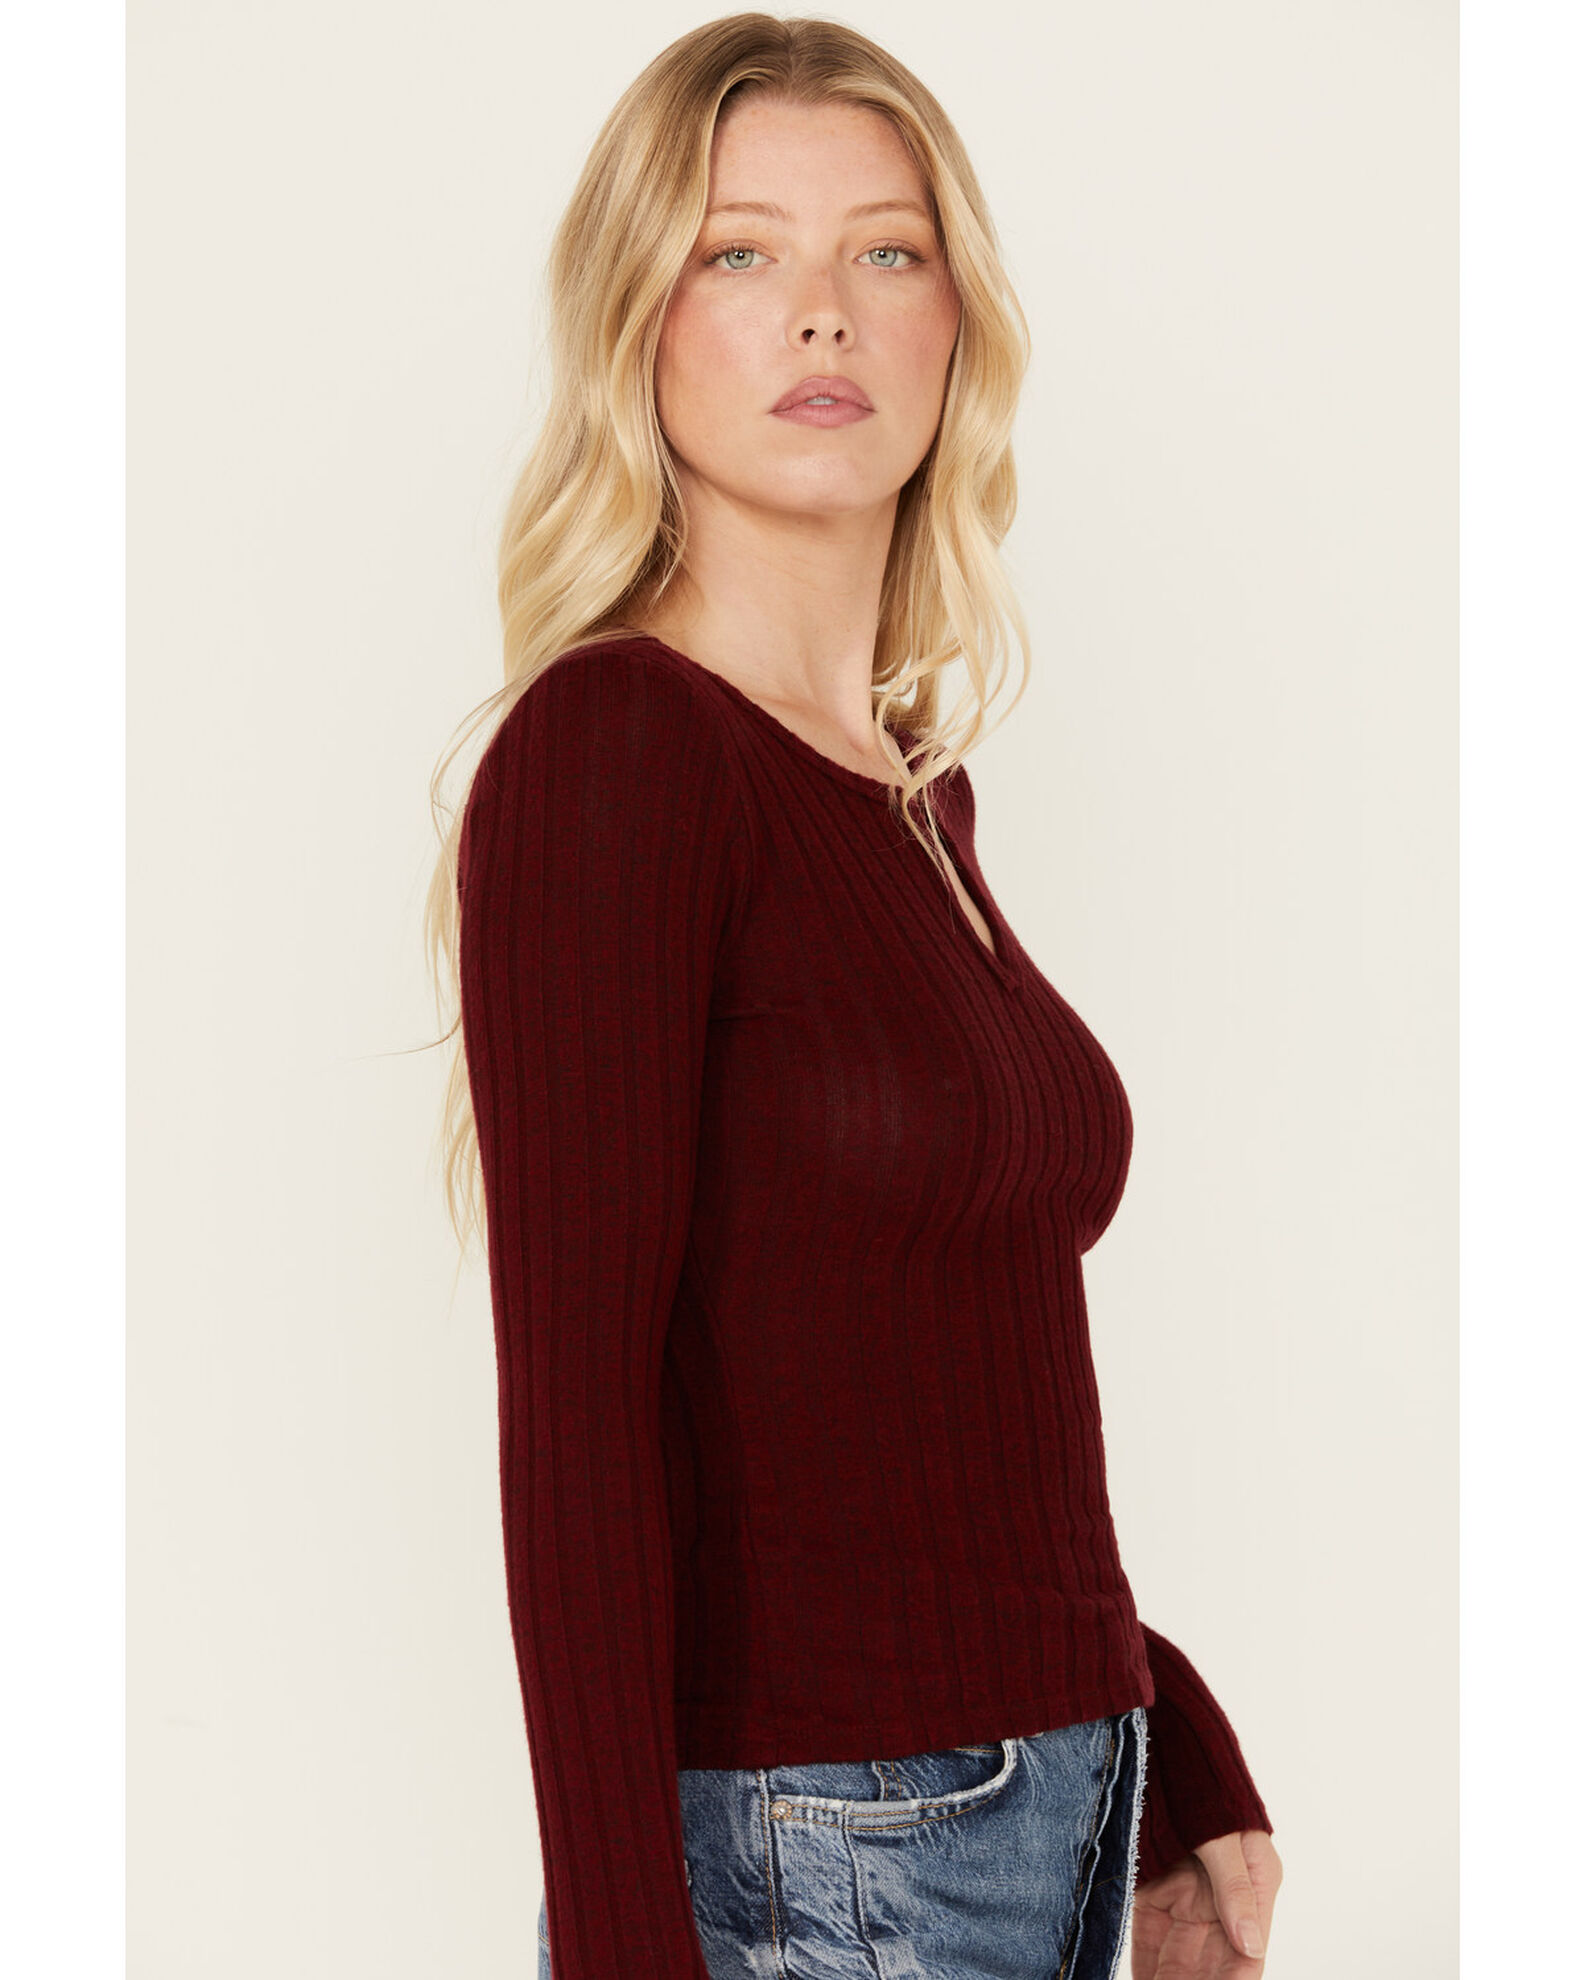 Panhandle Women's Wide Wale Rib Knit Long Sleeve Top | Mall of